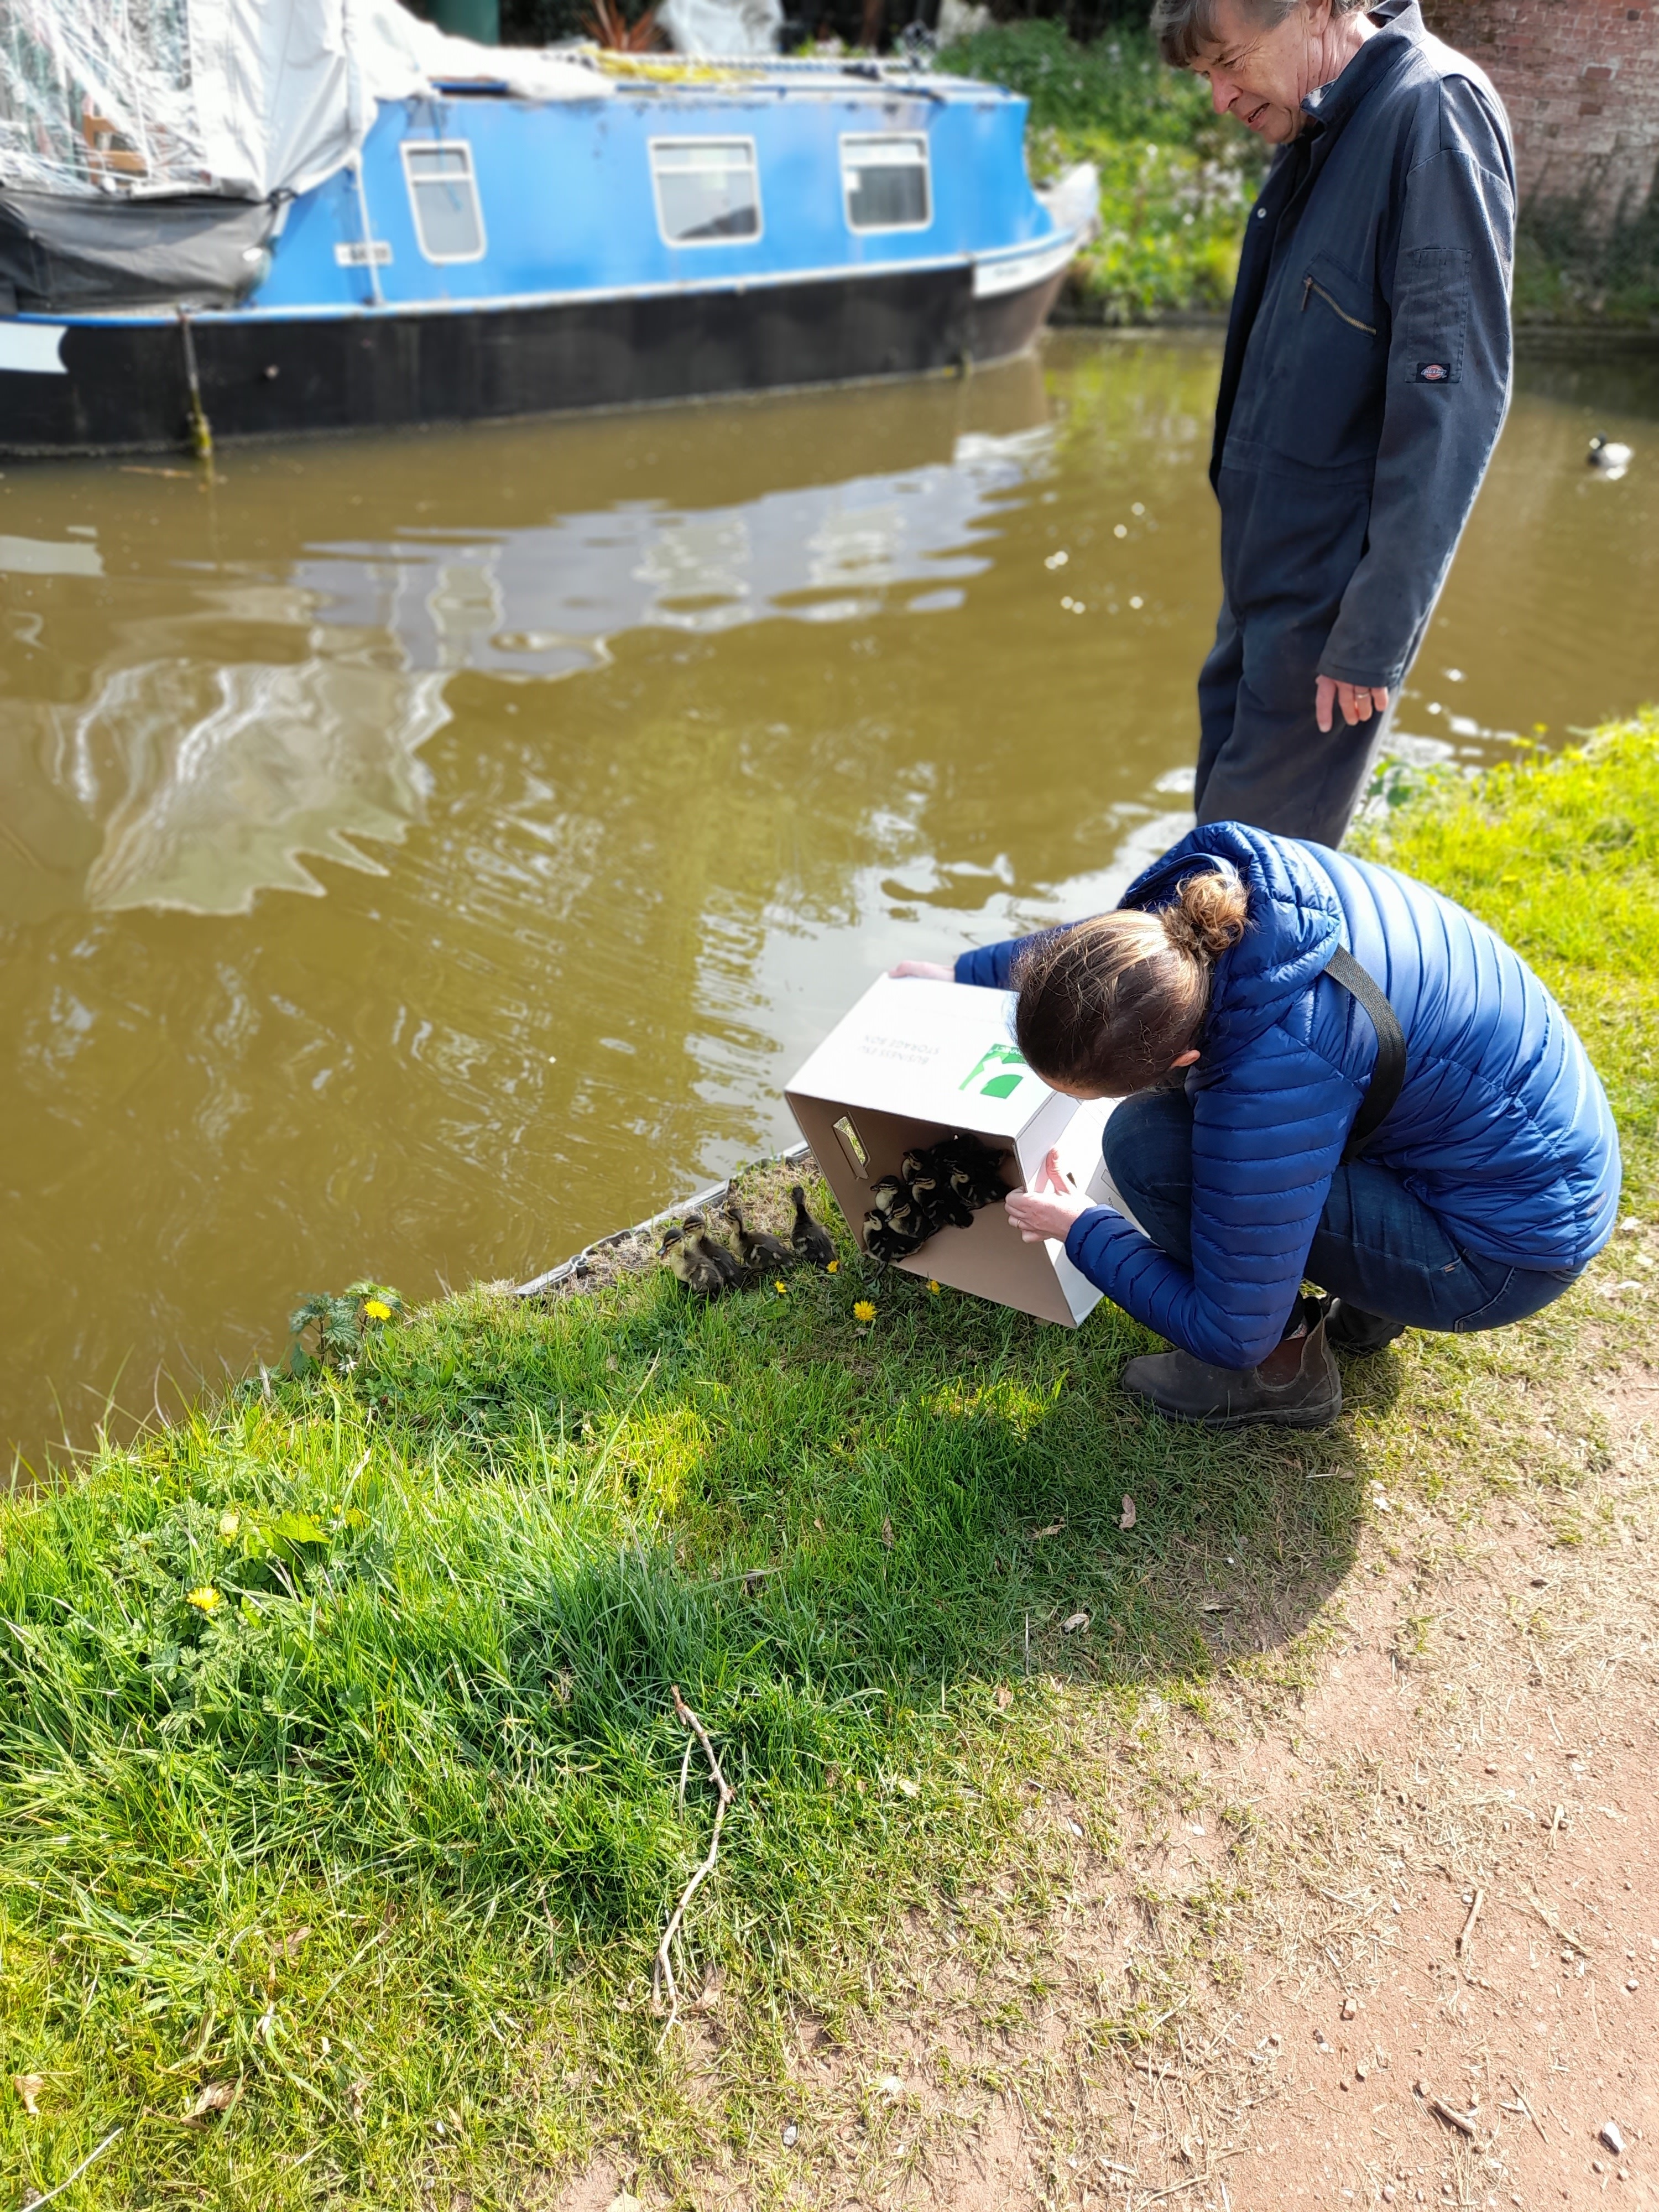 The ducklings were released by the canal